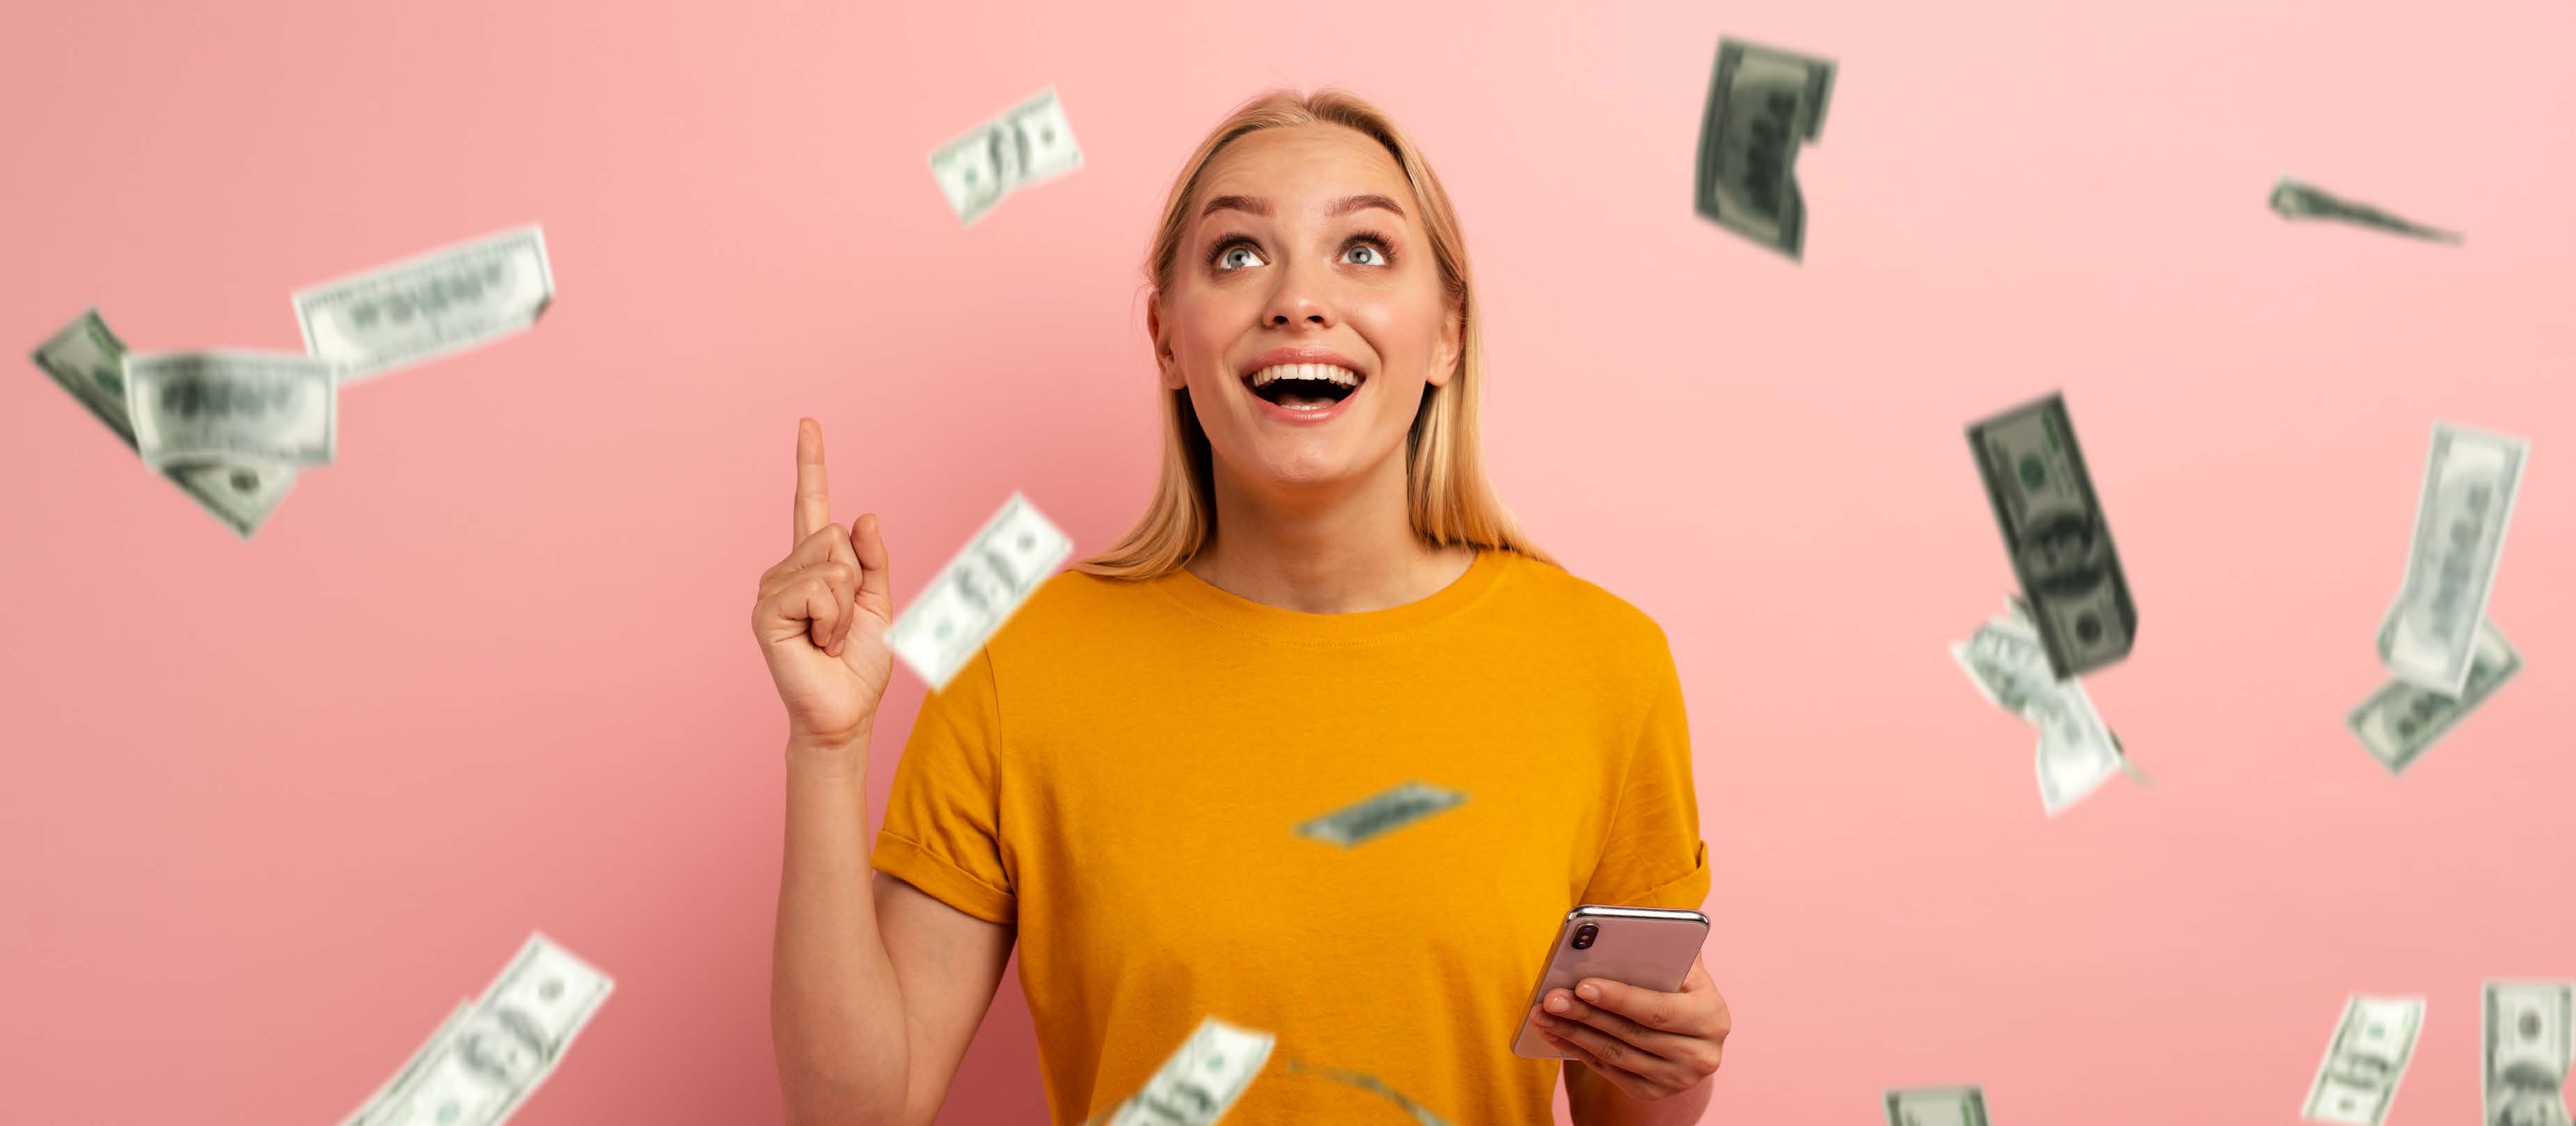 Excited White blonde holding phone and pointing at ceiling with money falling